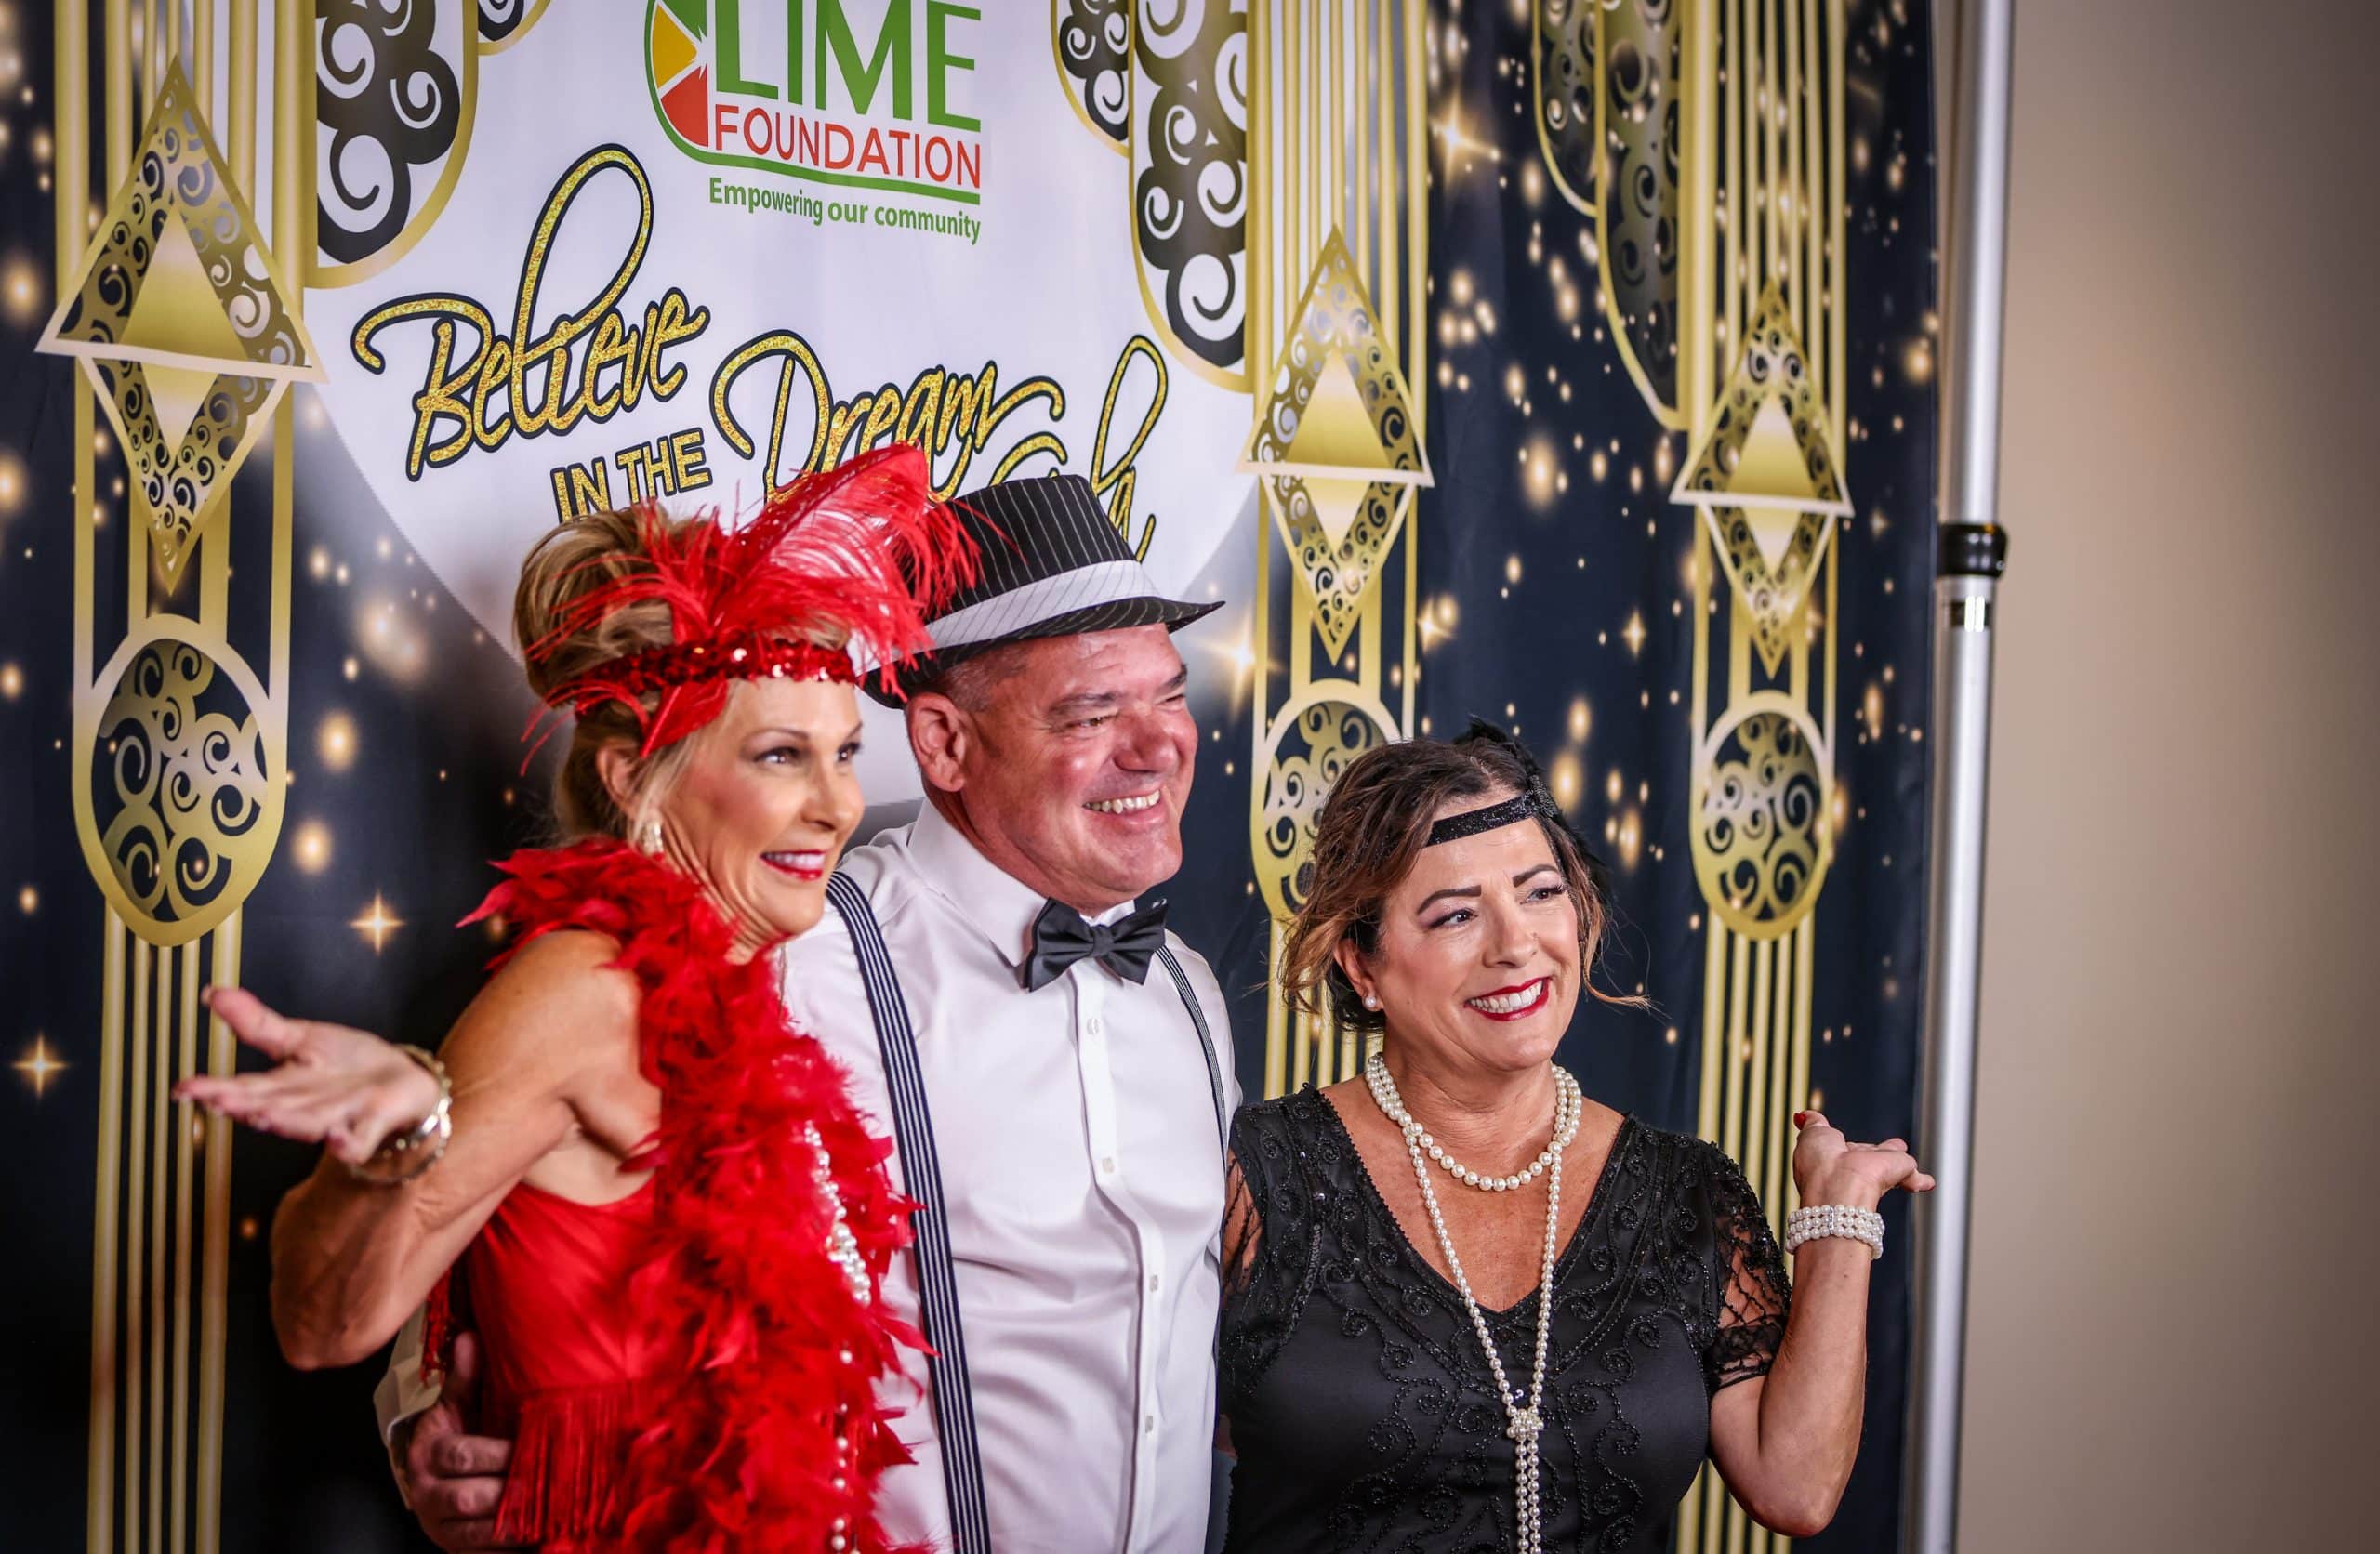 A group of people posing for a photo at a 1920's themed party hosted by The LIME Foundation of Santa Rosa.